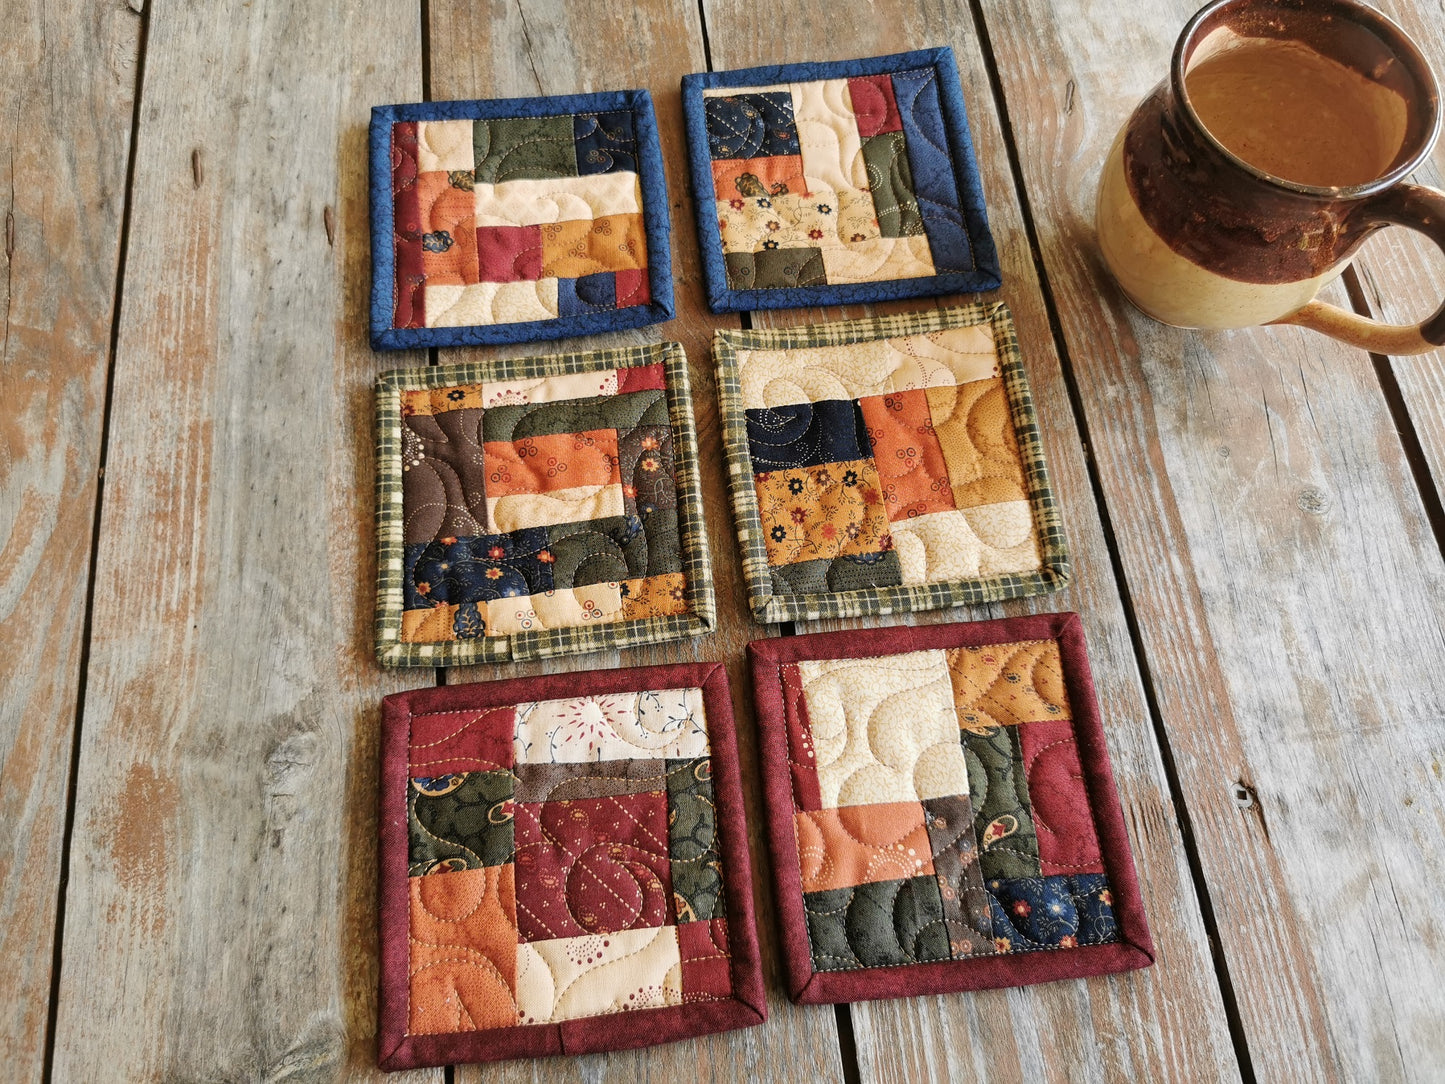 These quilted fabric coasters are done in scrappy patchwork style and rustic country colors.